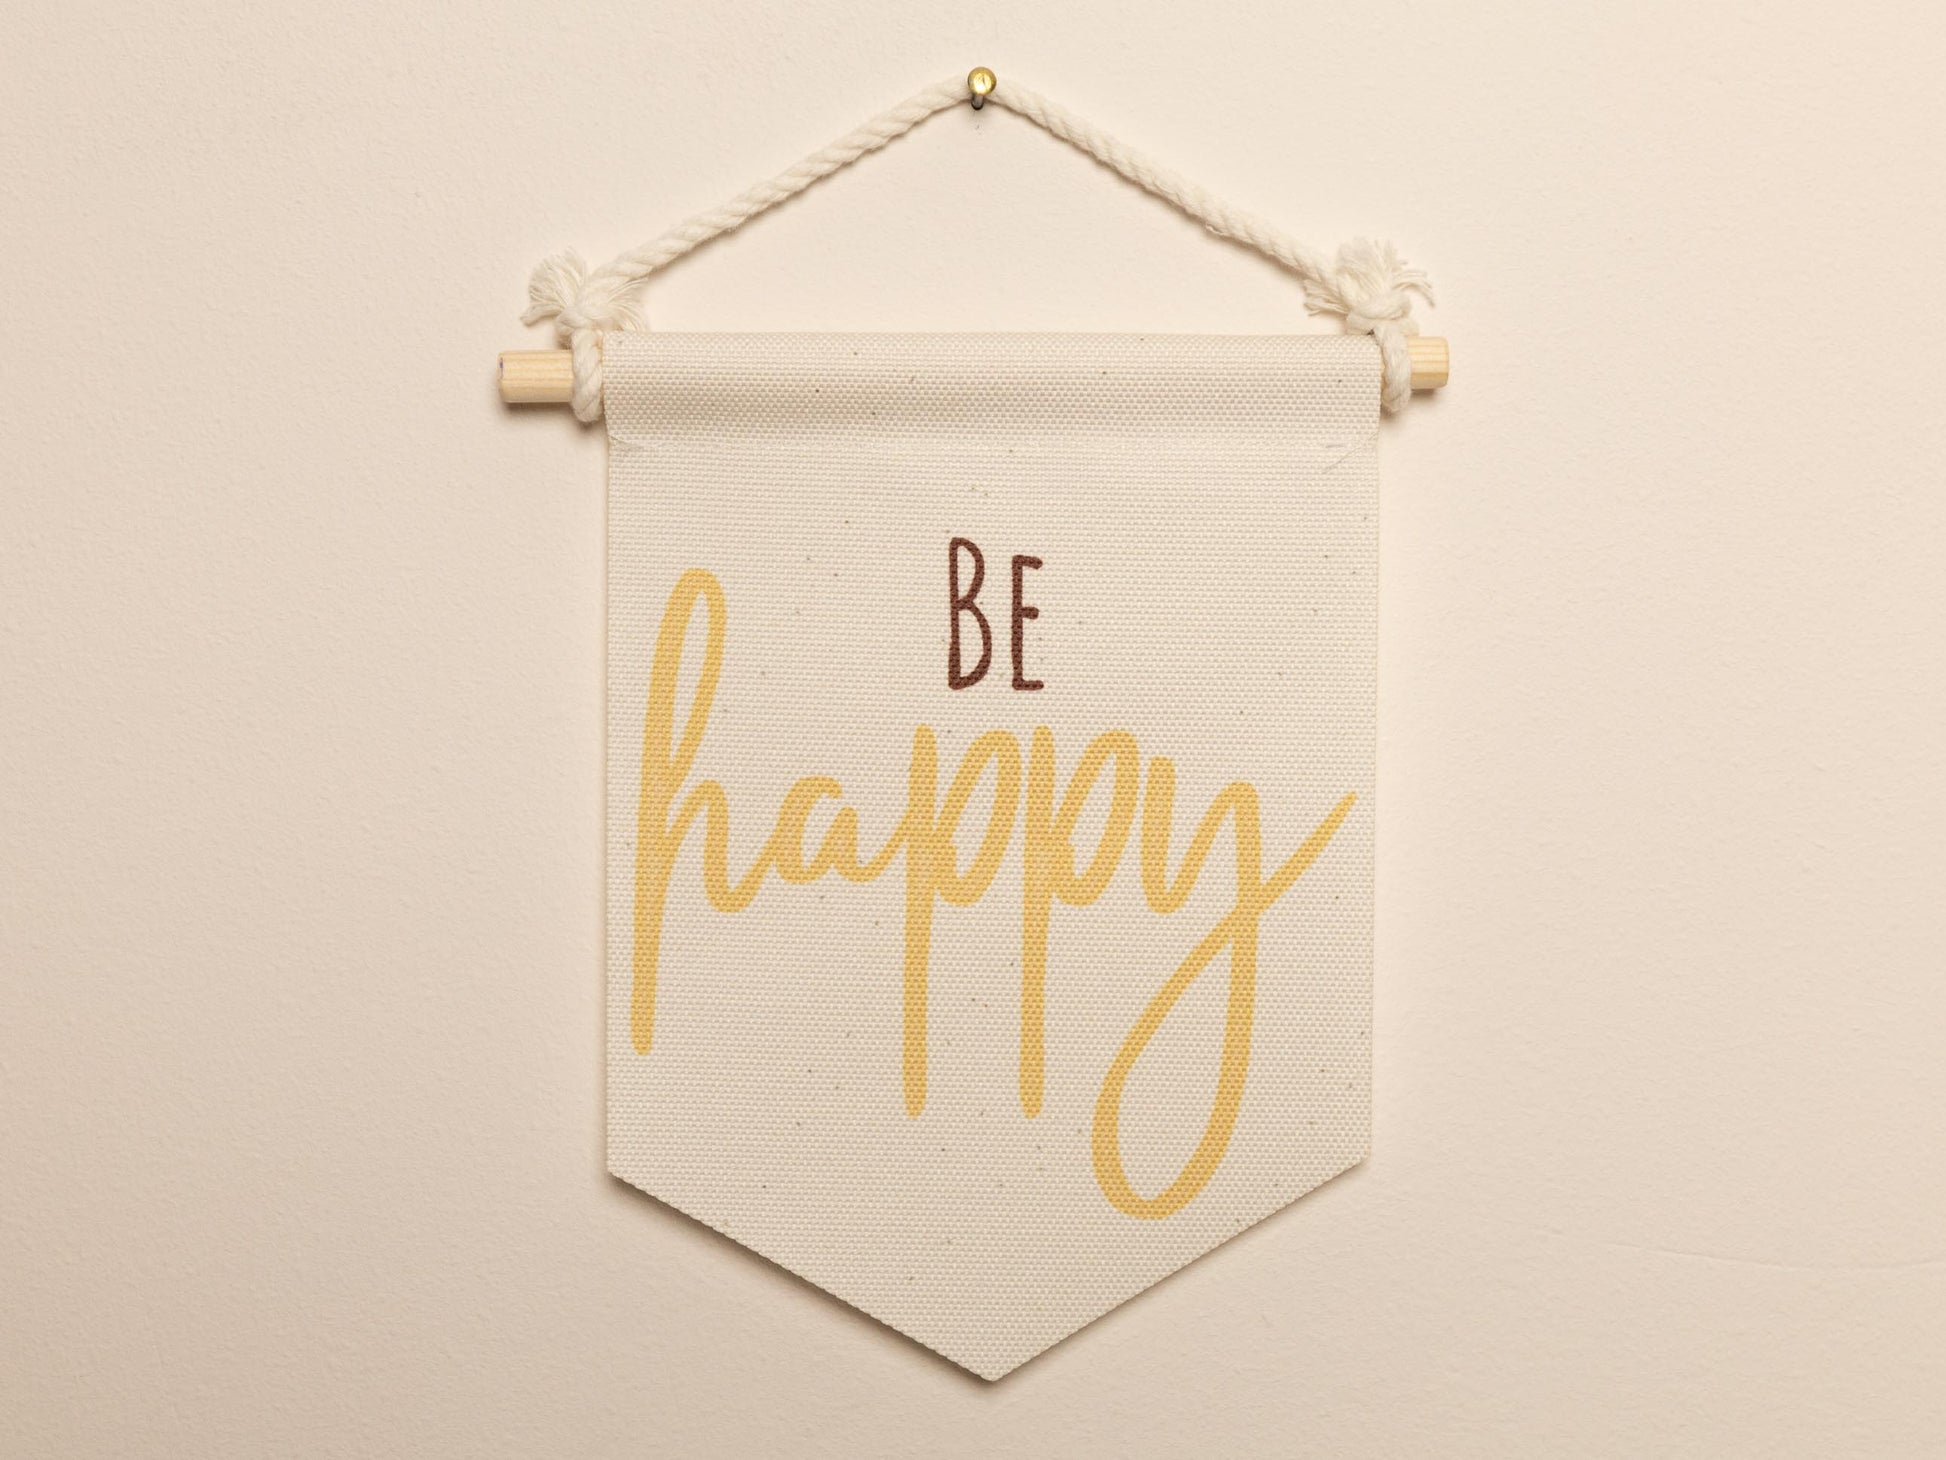 Stoffwimpel Be Happy mit Affirmations Spruch